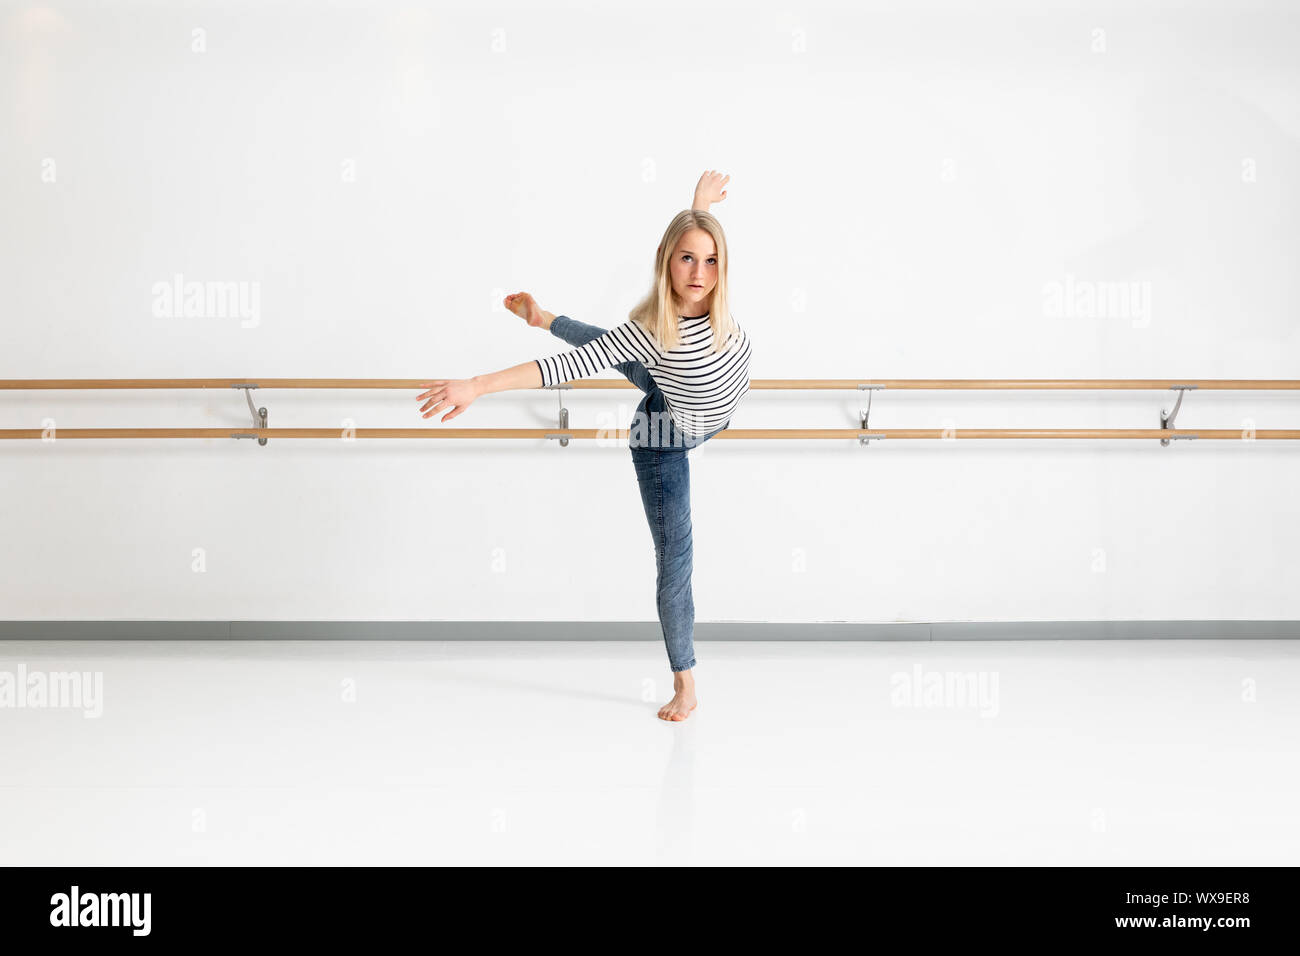 female dancer in action Stock Photo